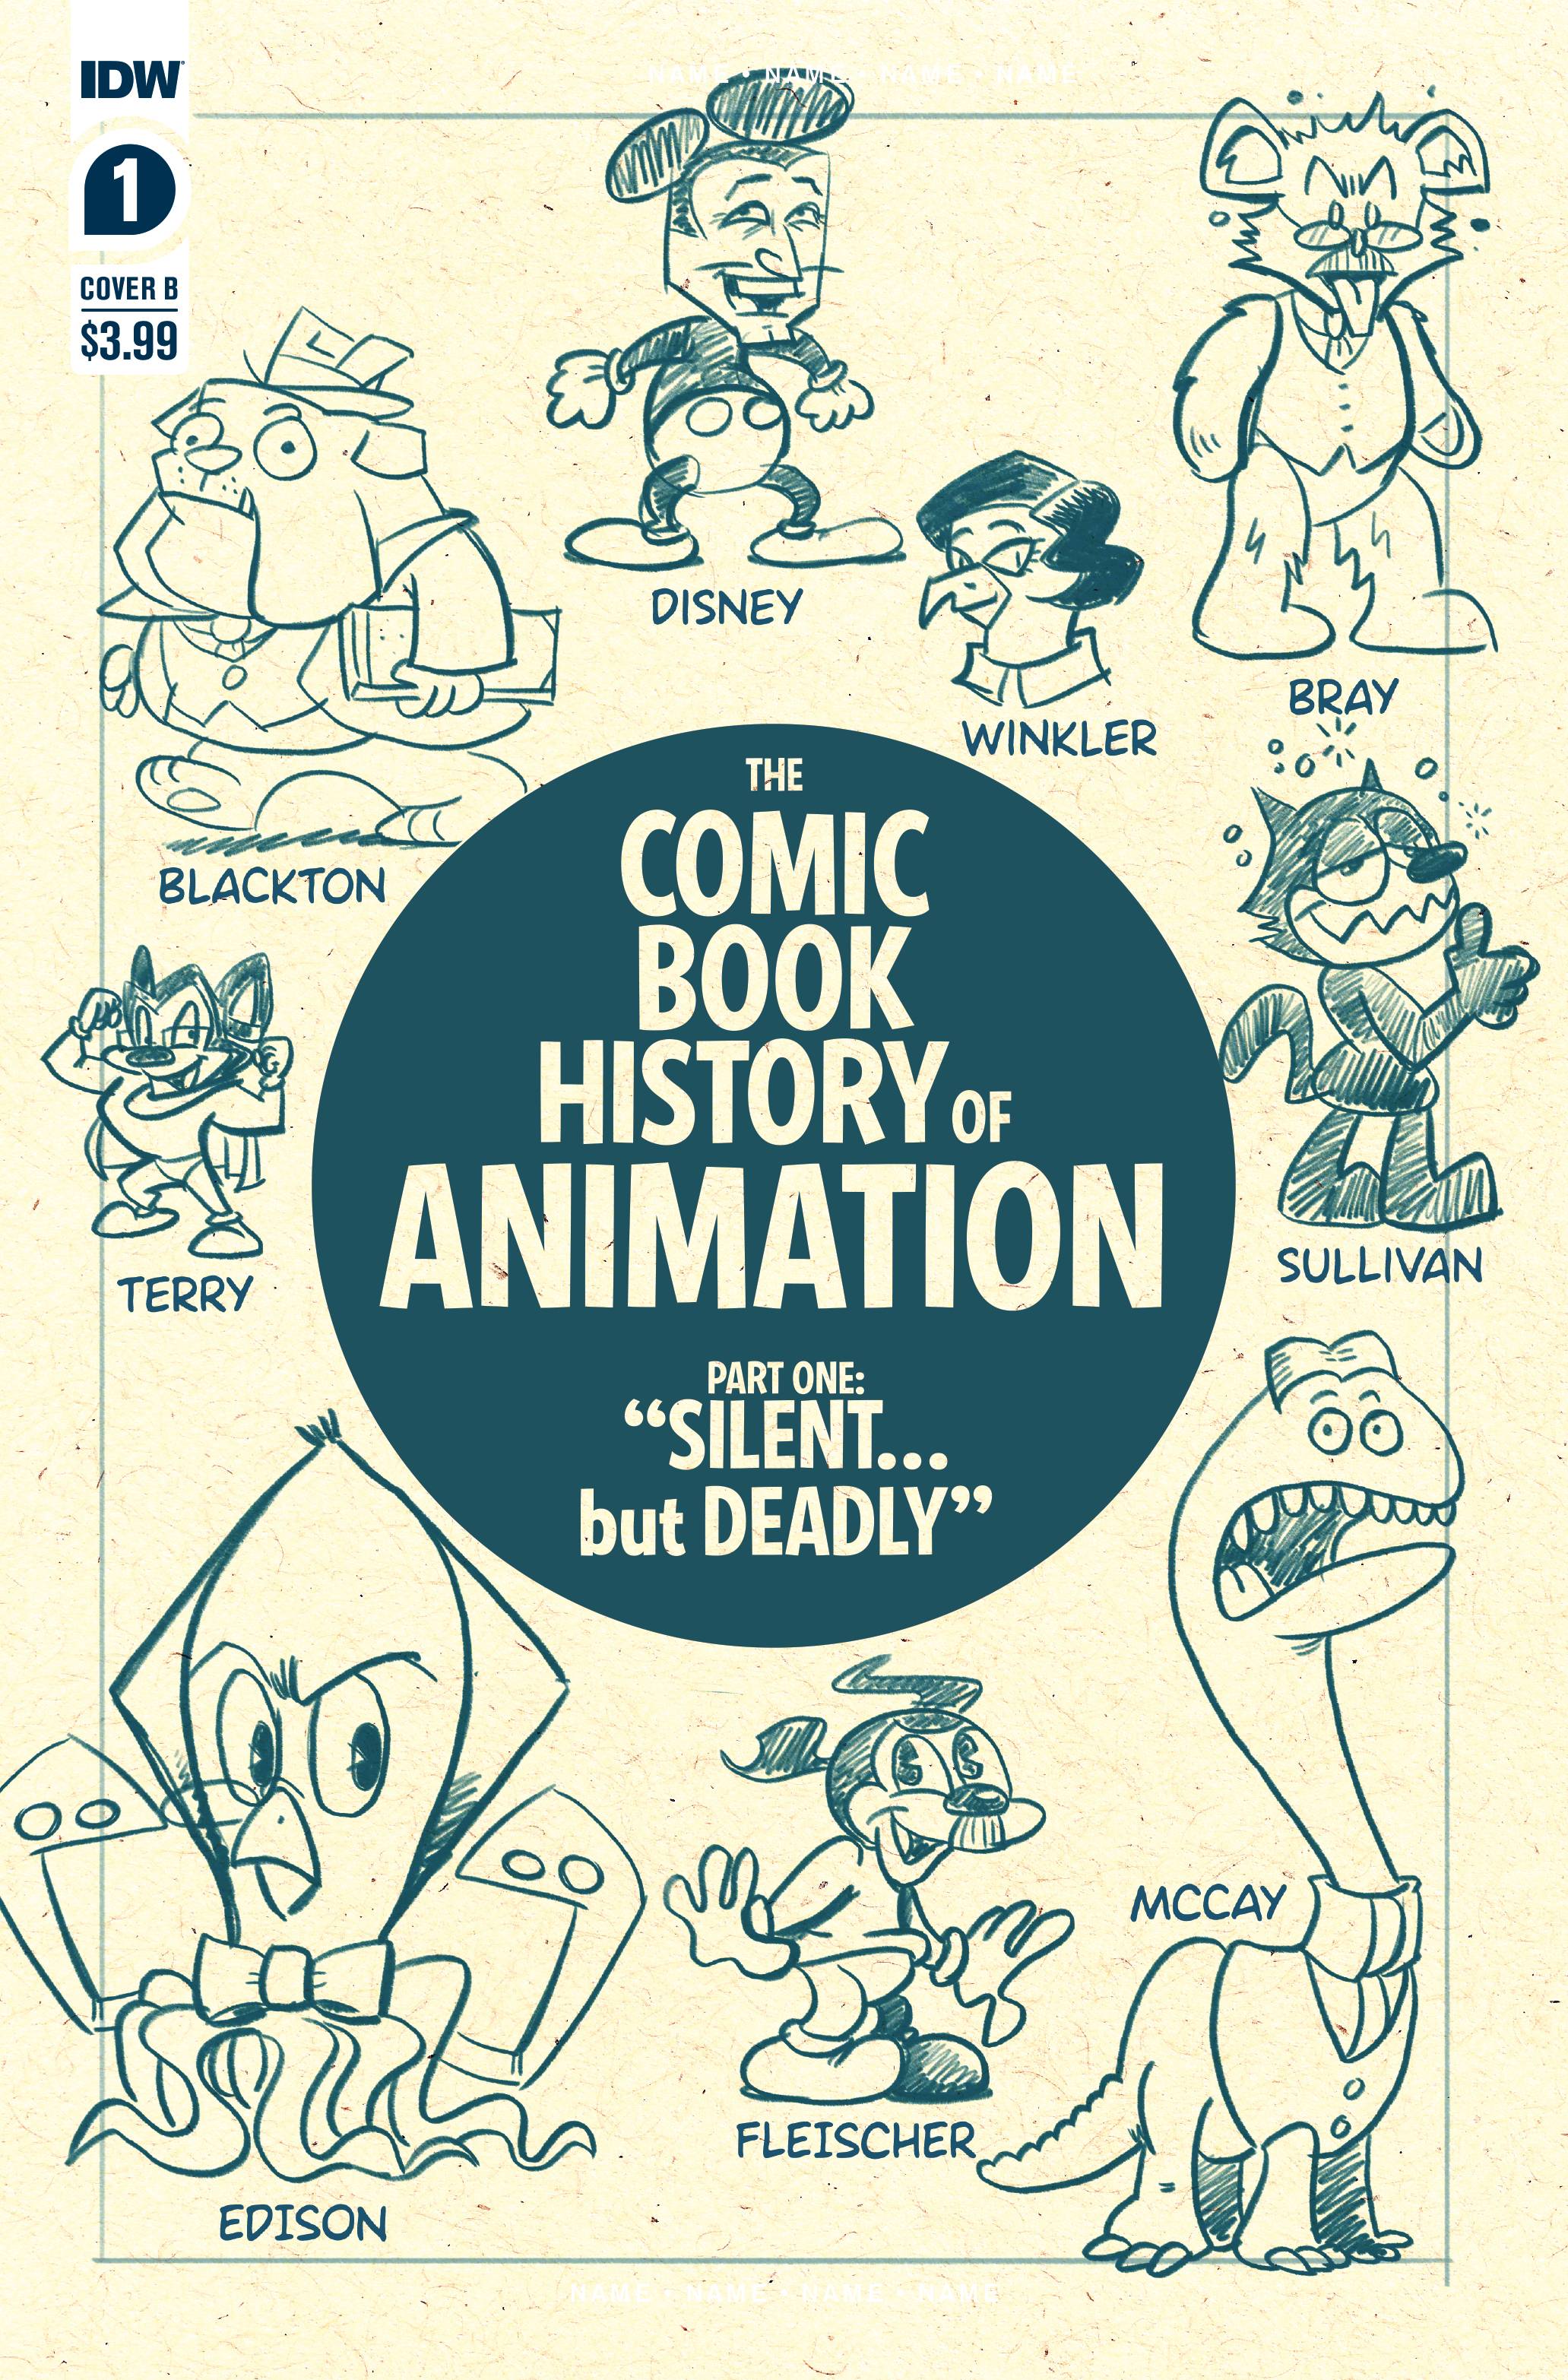 COMIC BOOK HISTORY OF ANIMATION